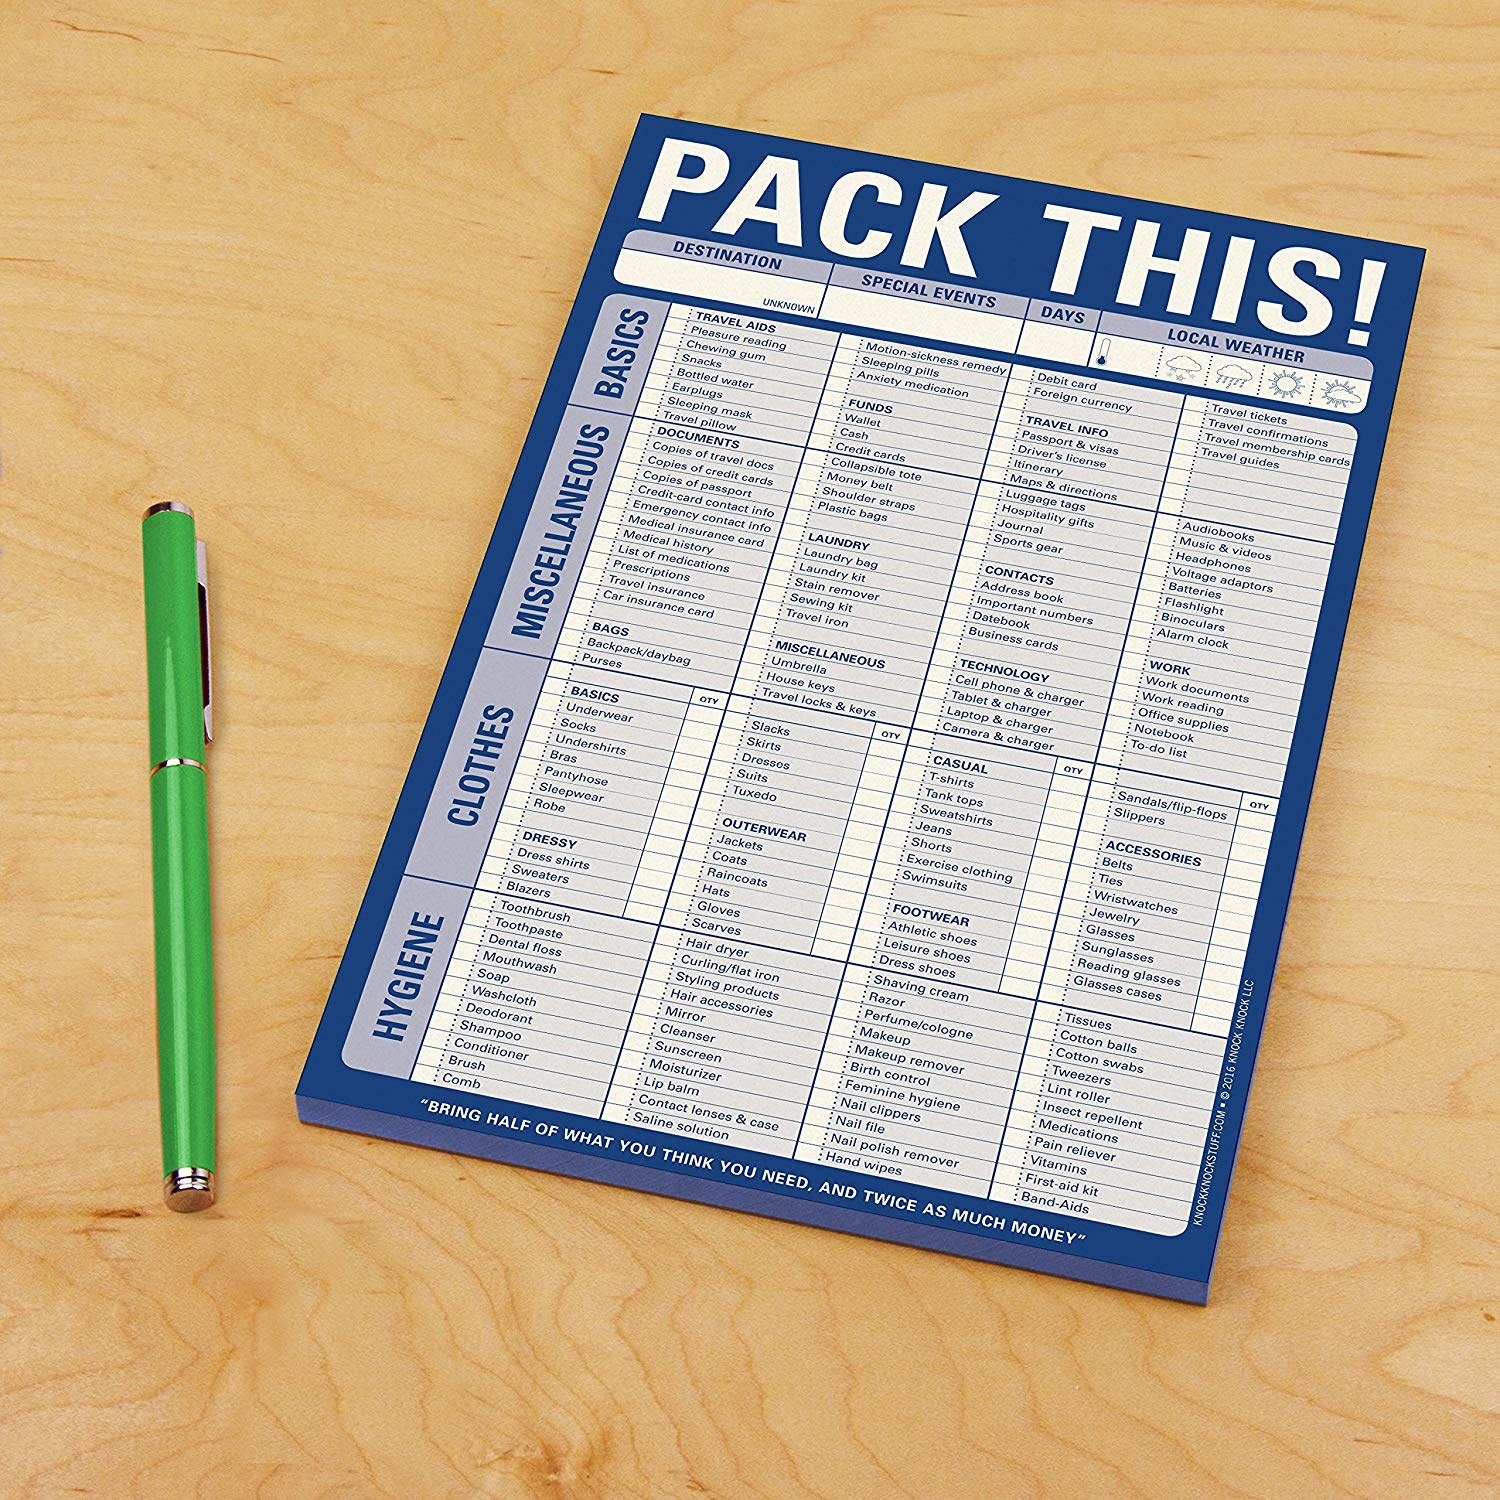 packing checklist that says pack this